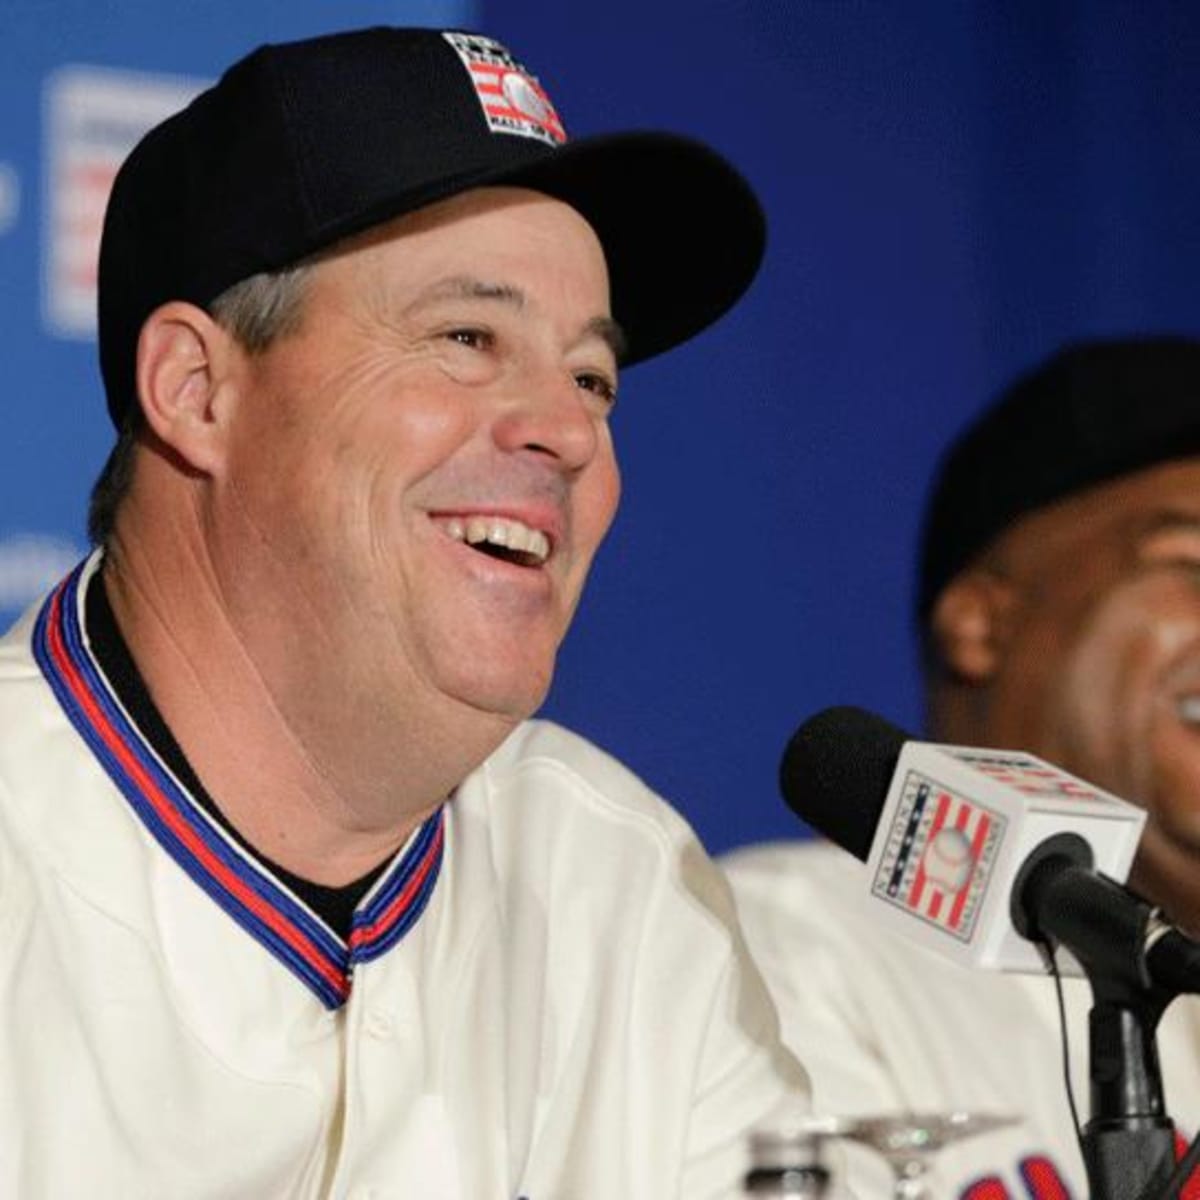 Maddux Discusses Location, Hitters' Weaknesses and His Fellow Hall